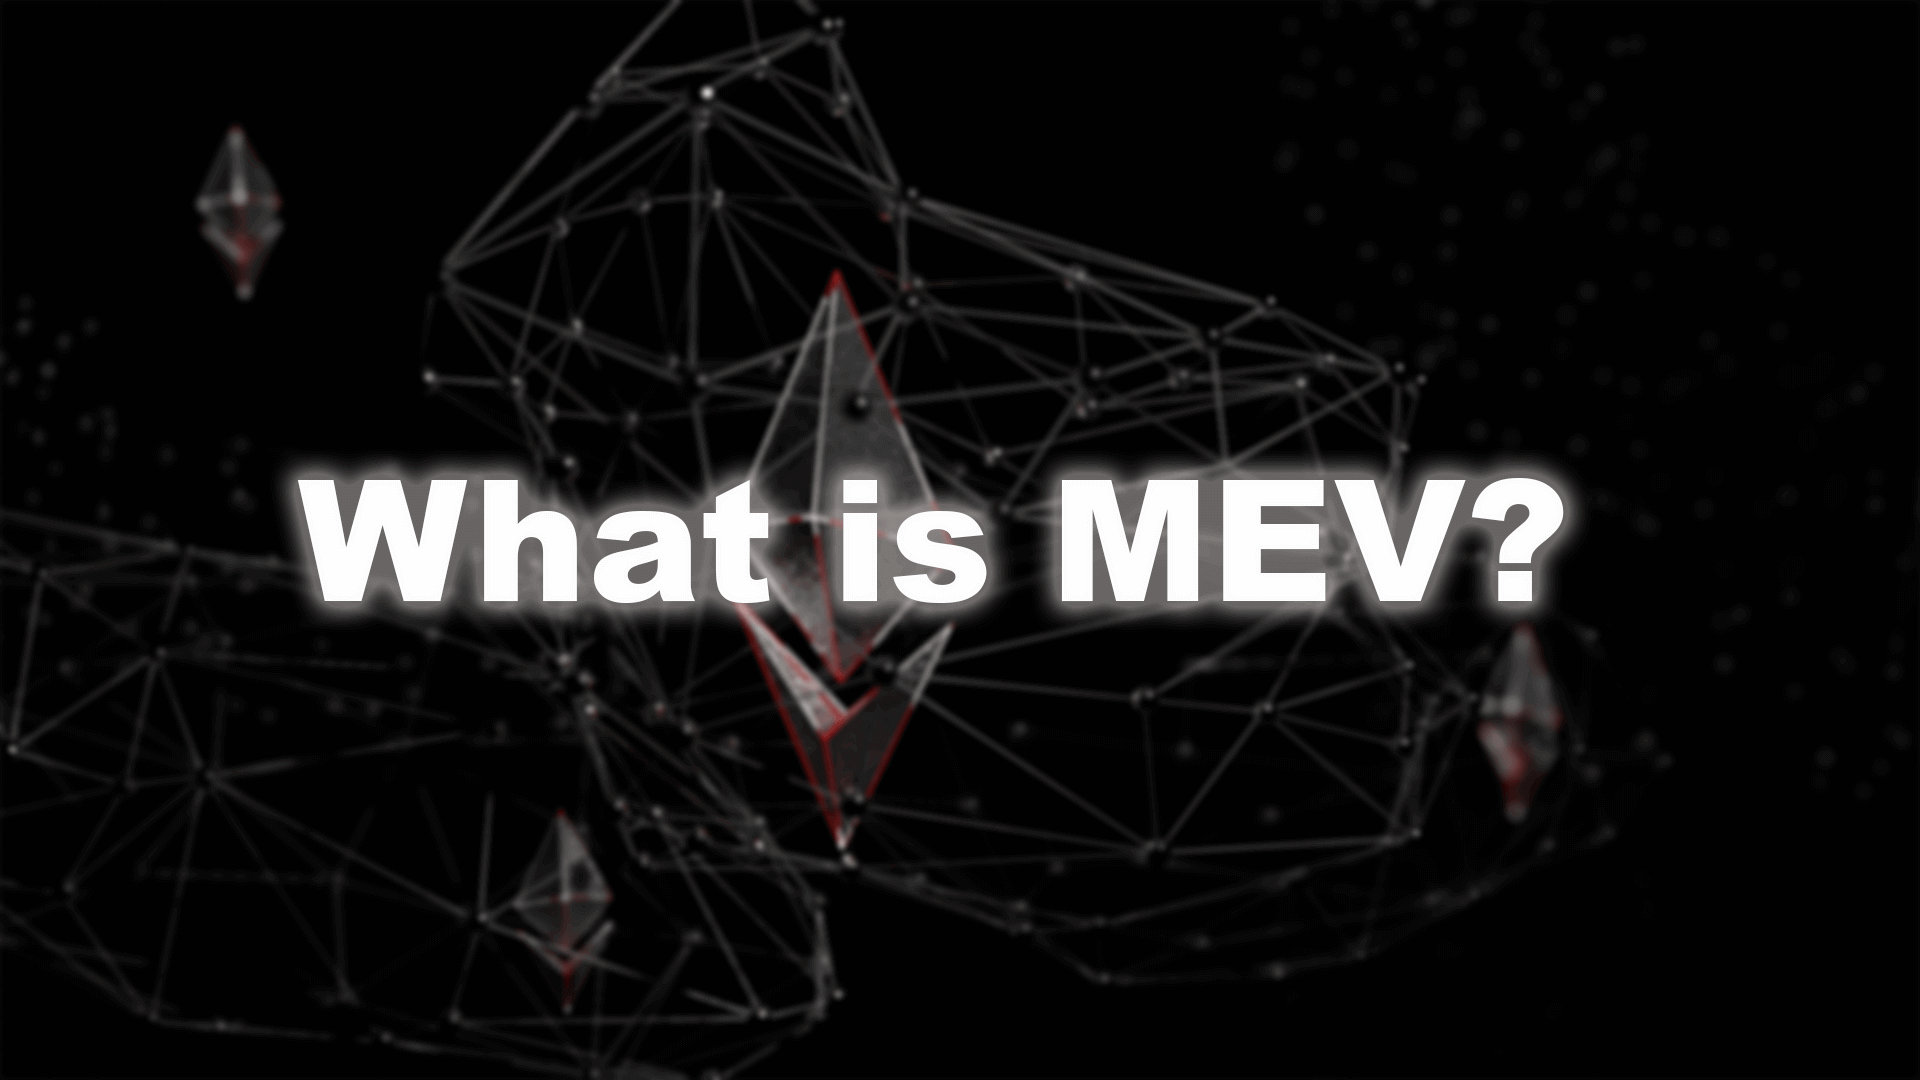 What is MEV?